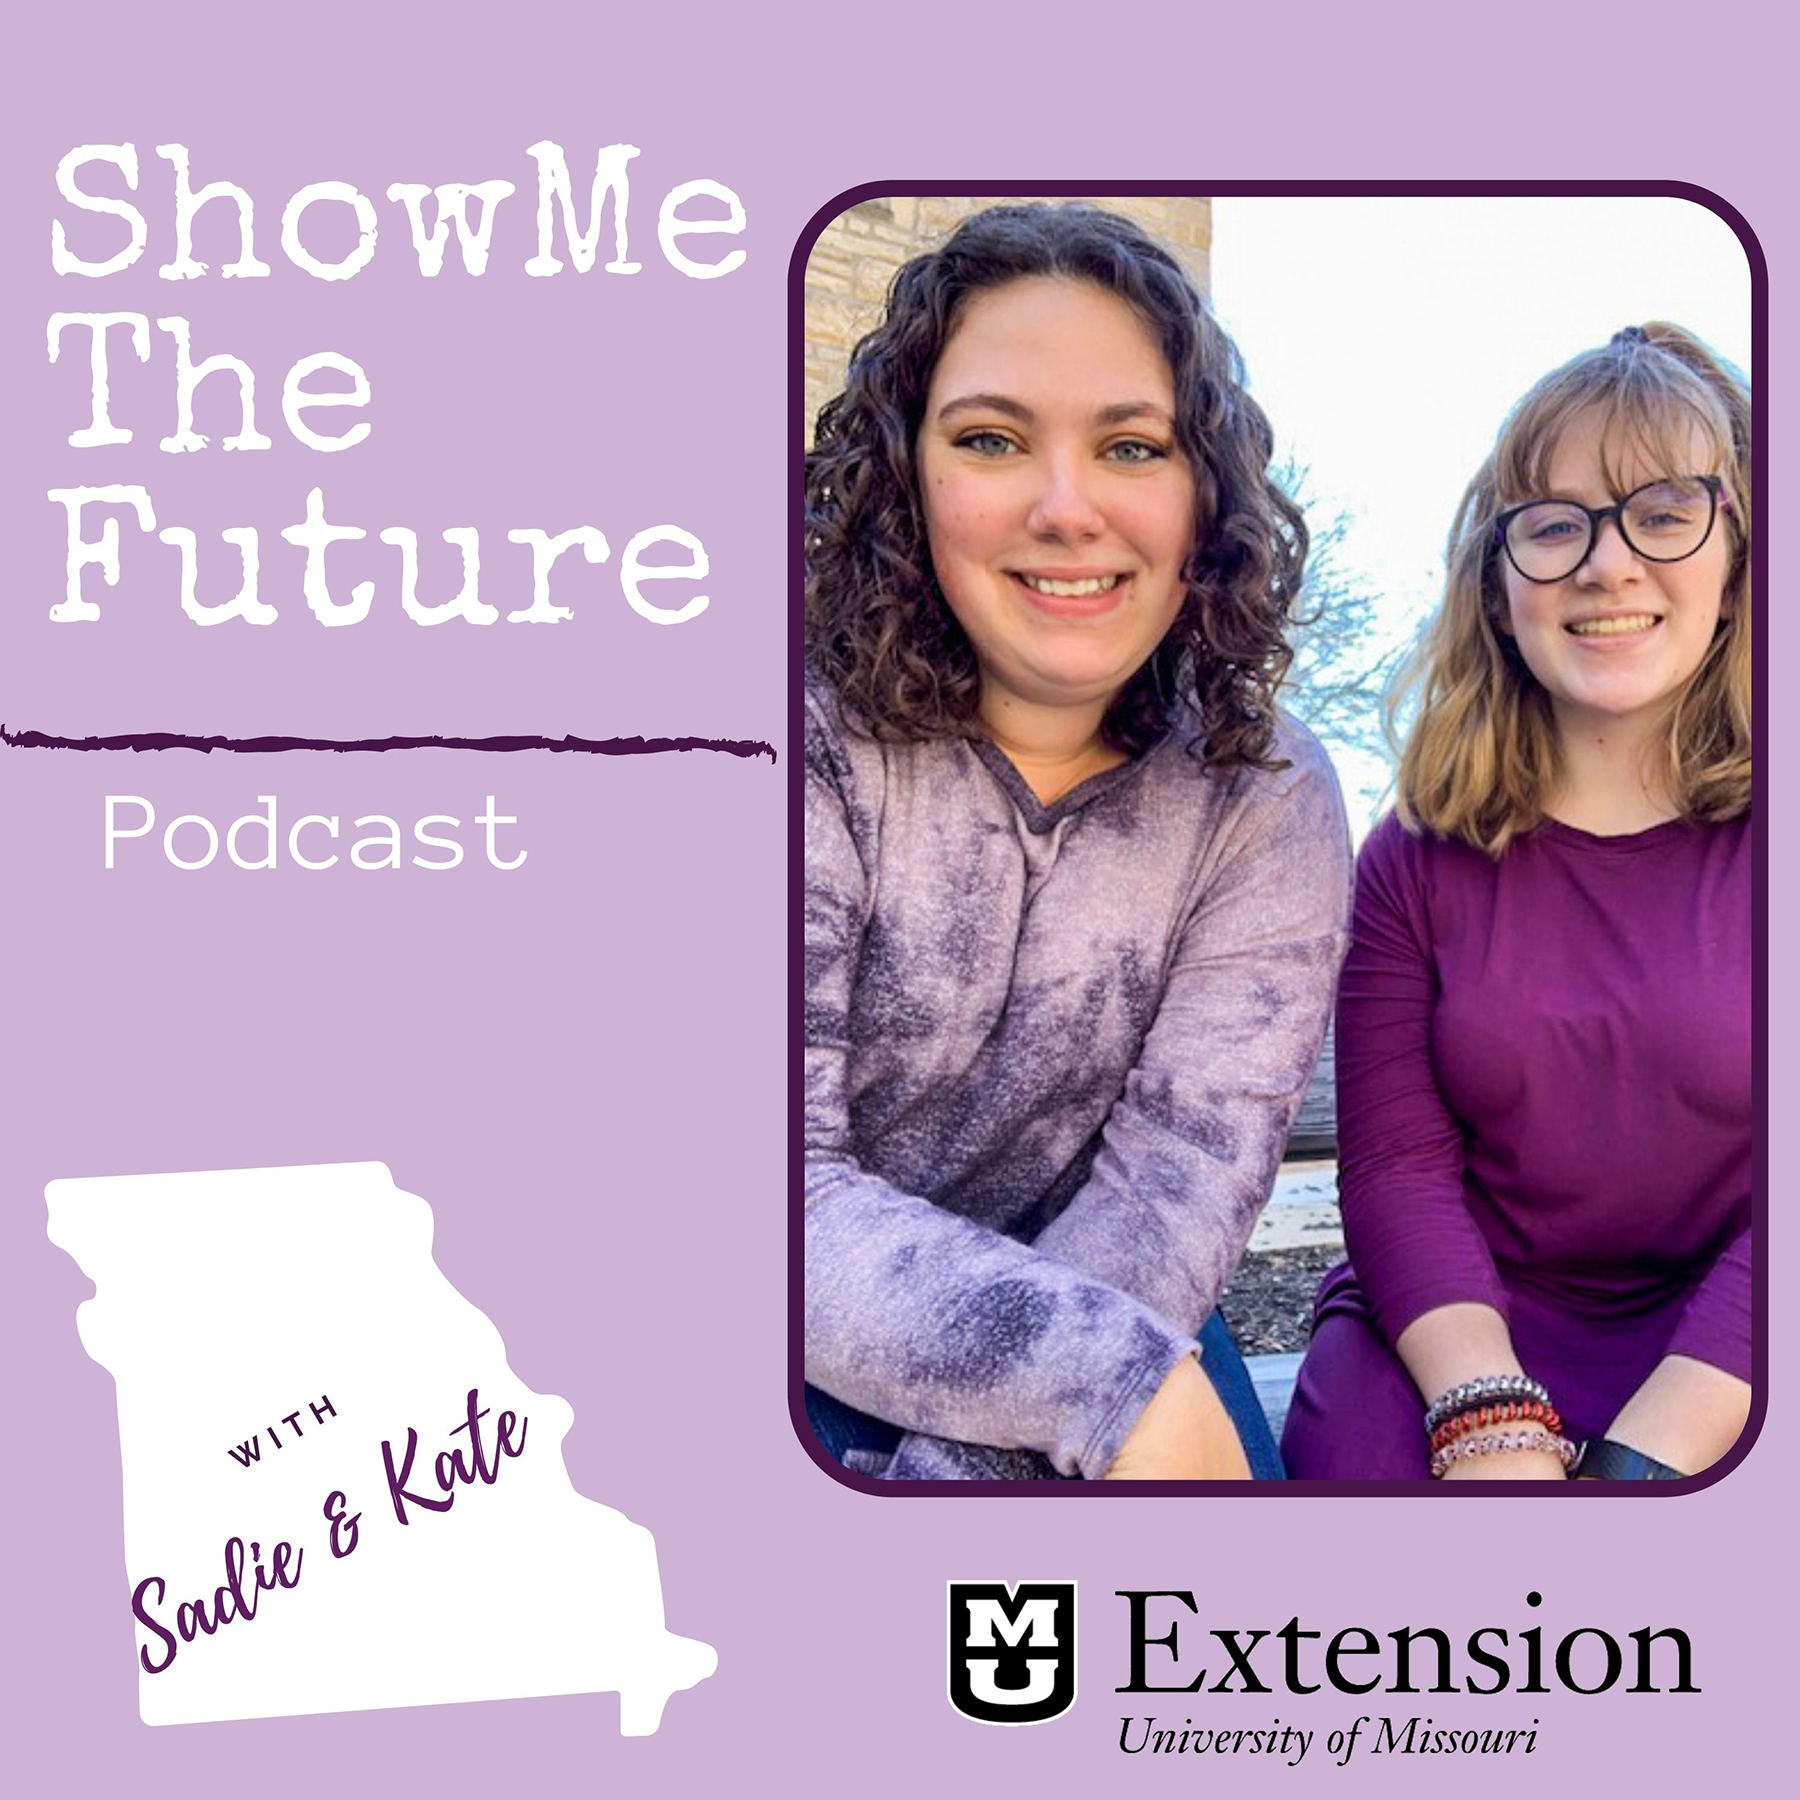 Open Mizzou grad student Kate Preston, left, and middle schooler Sadie Tummons host a career exploration podcast for Show Me the Future.